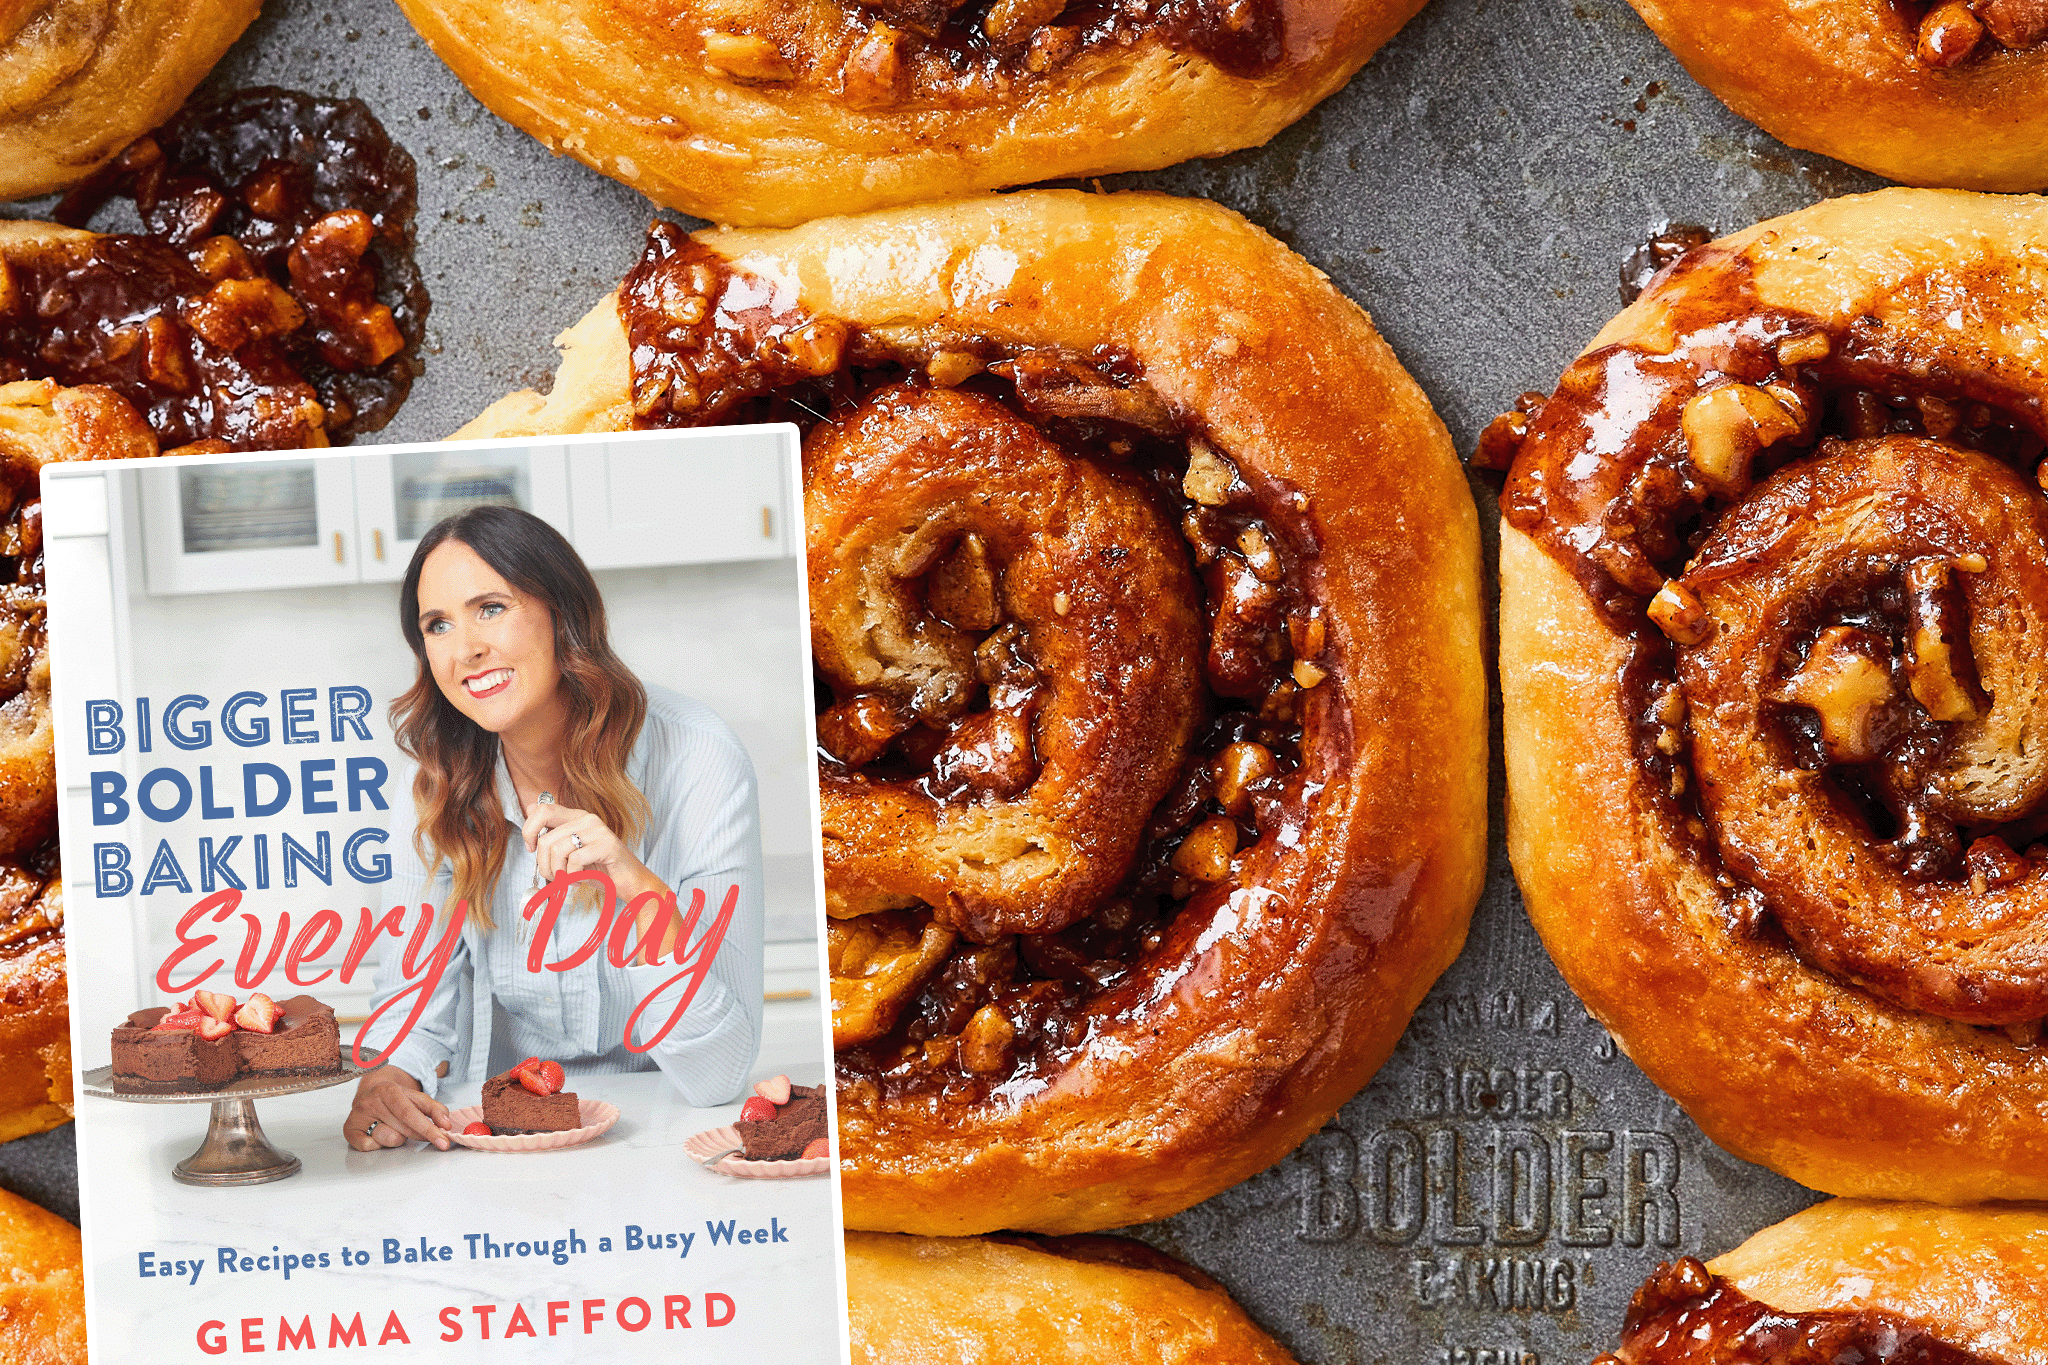 Sticky Maple Walnut Morning Buns with the Bigger Bolder Baking Every Day Cookbook